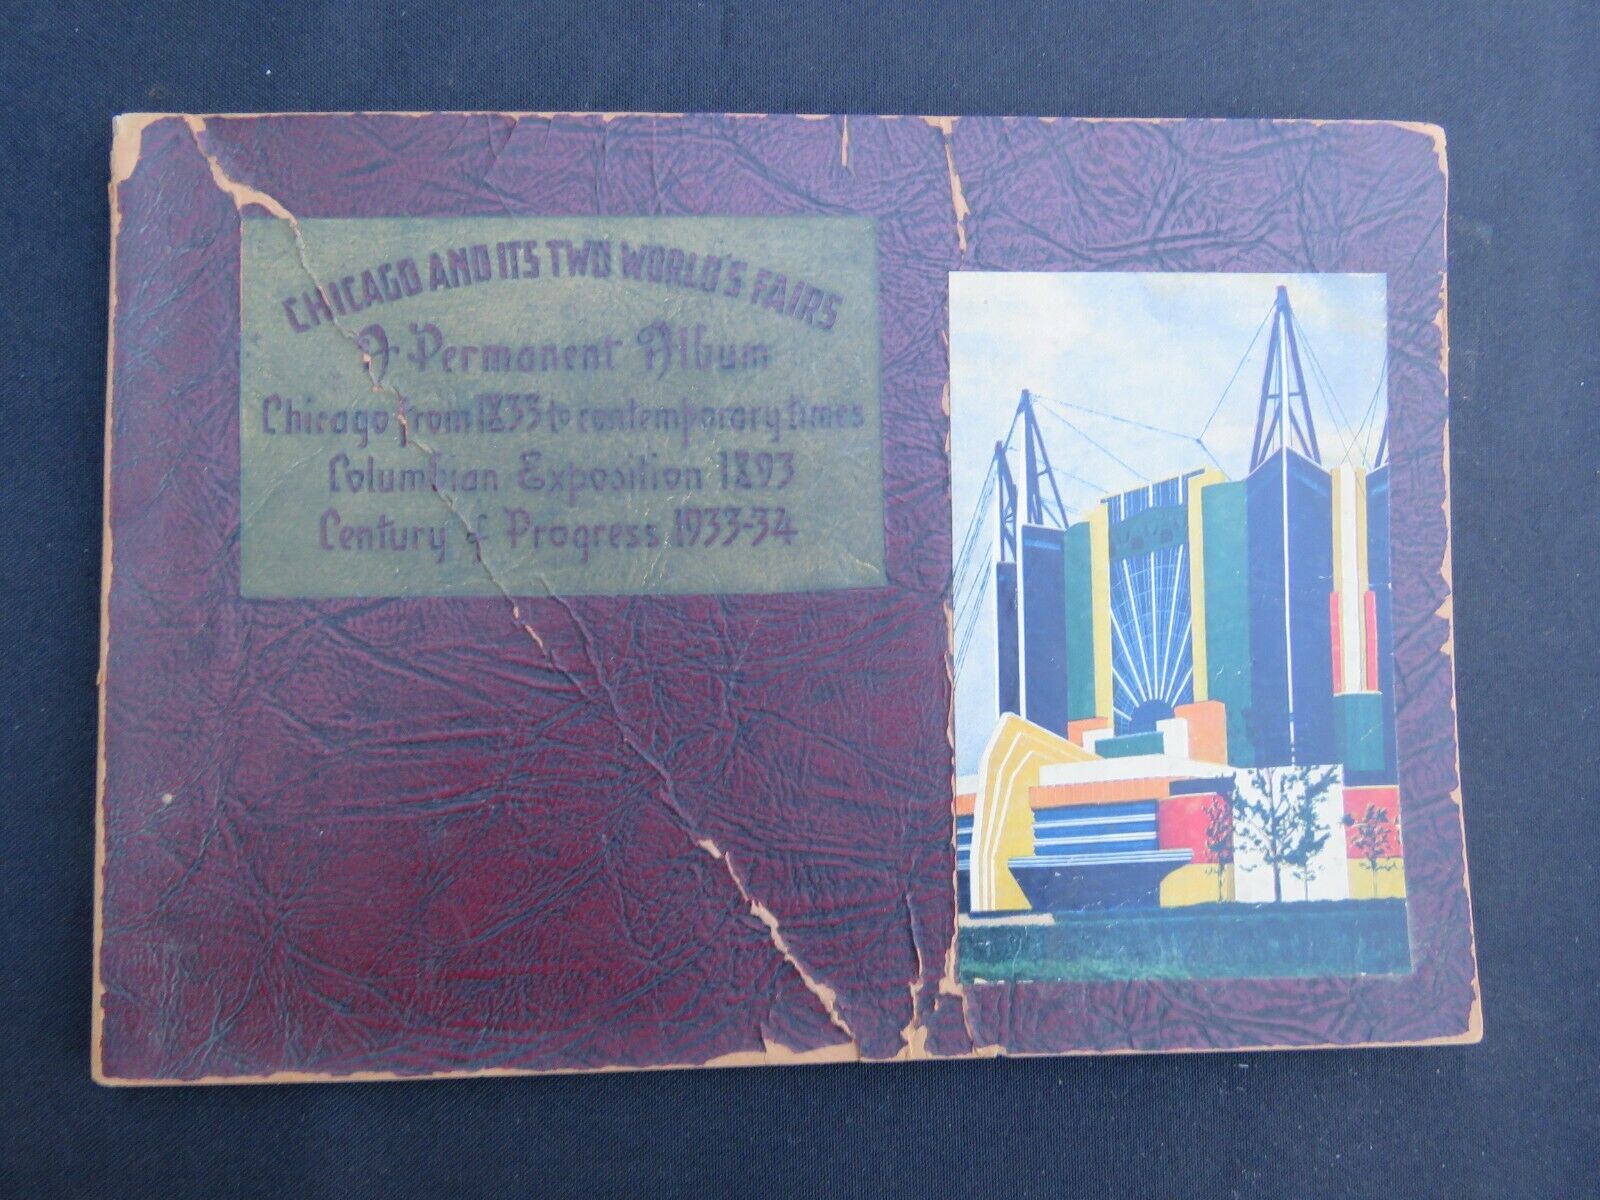 CHICAGO AND ITS TWO WORLD FAIRS SOUVENIR BOOK 1893 1933 VINTAGE ORIGINAL BOOK